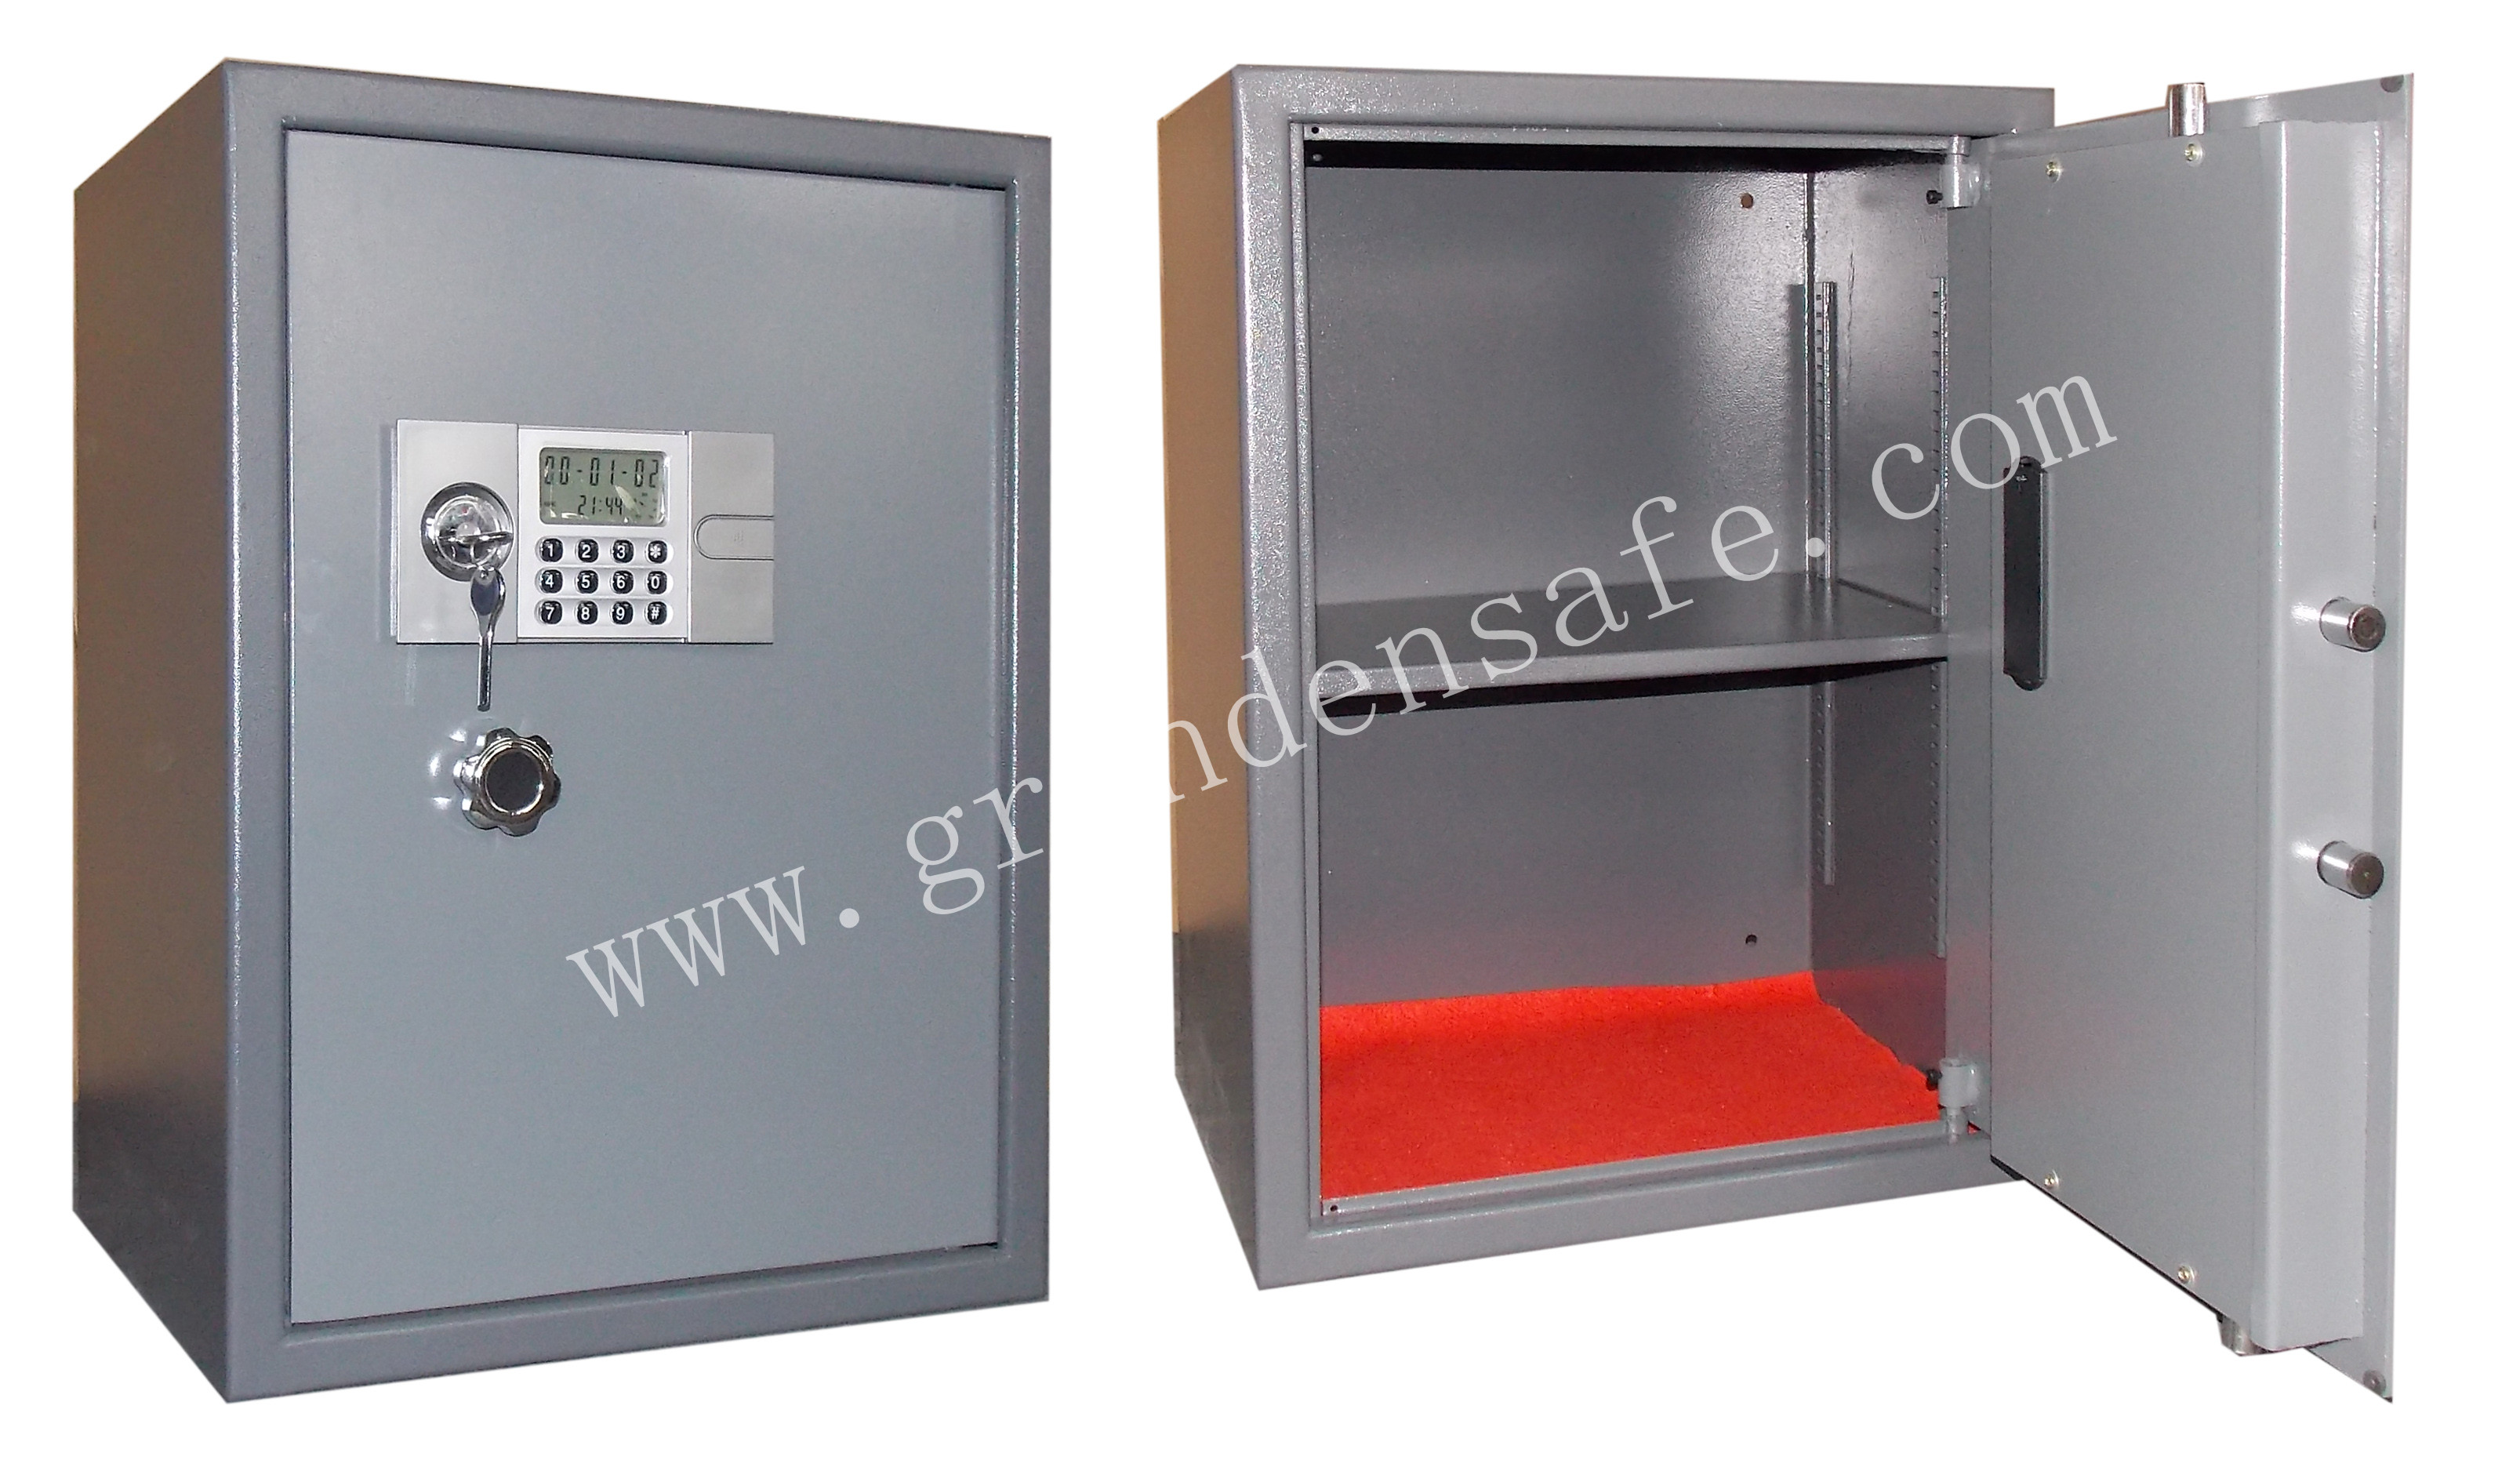 Office Safe / Commercial Safe (GD-73EK) (With LCD Display Electronic Lock)